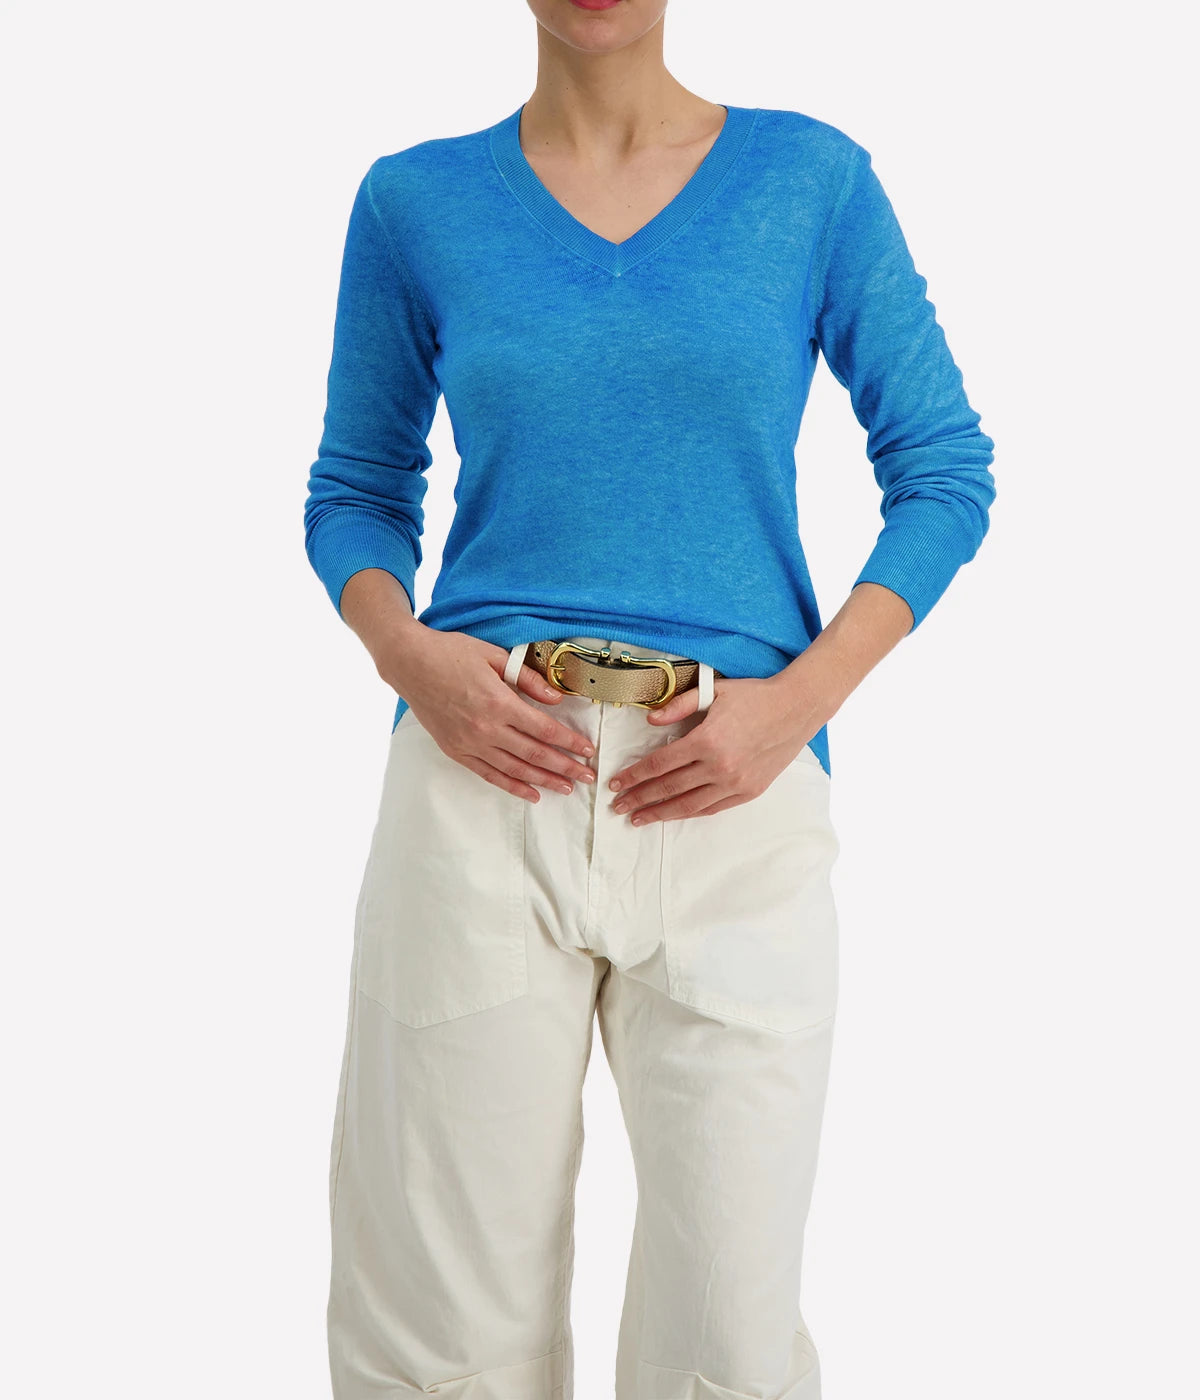 Bright blue V-Neck wool & cashmere lightweight long sleeve blend pullover by Avant Toi.